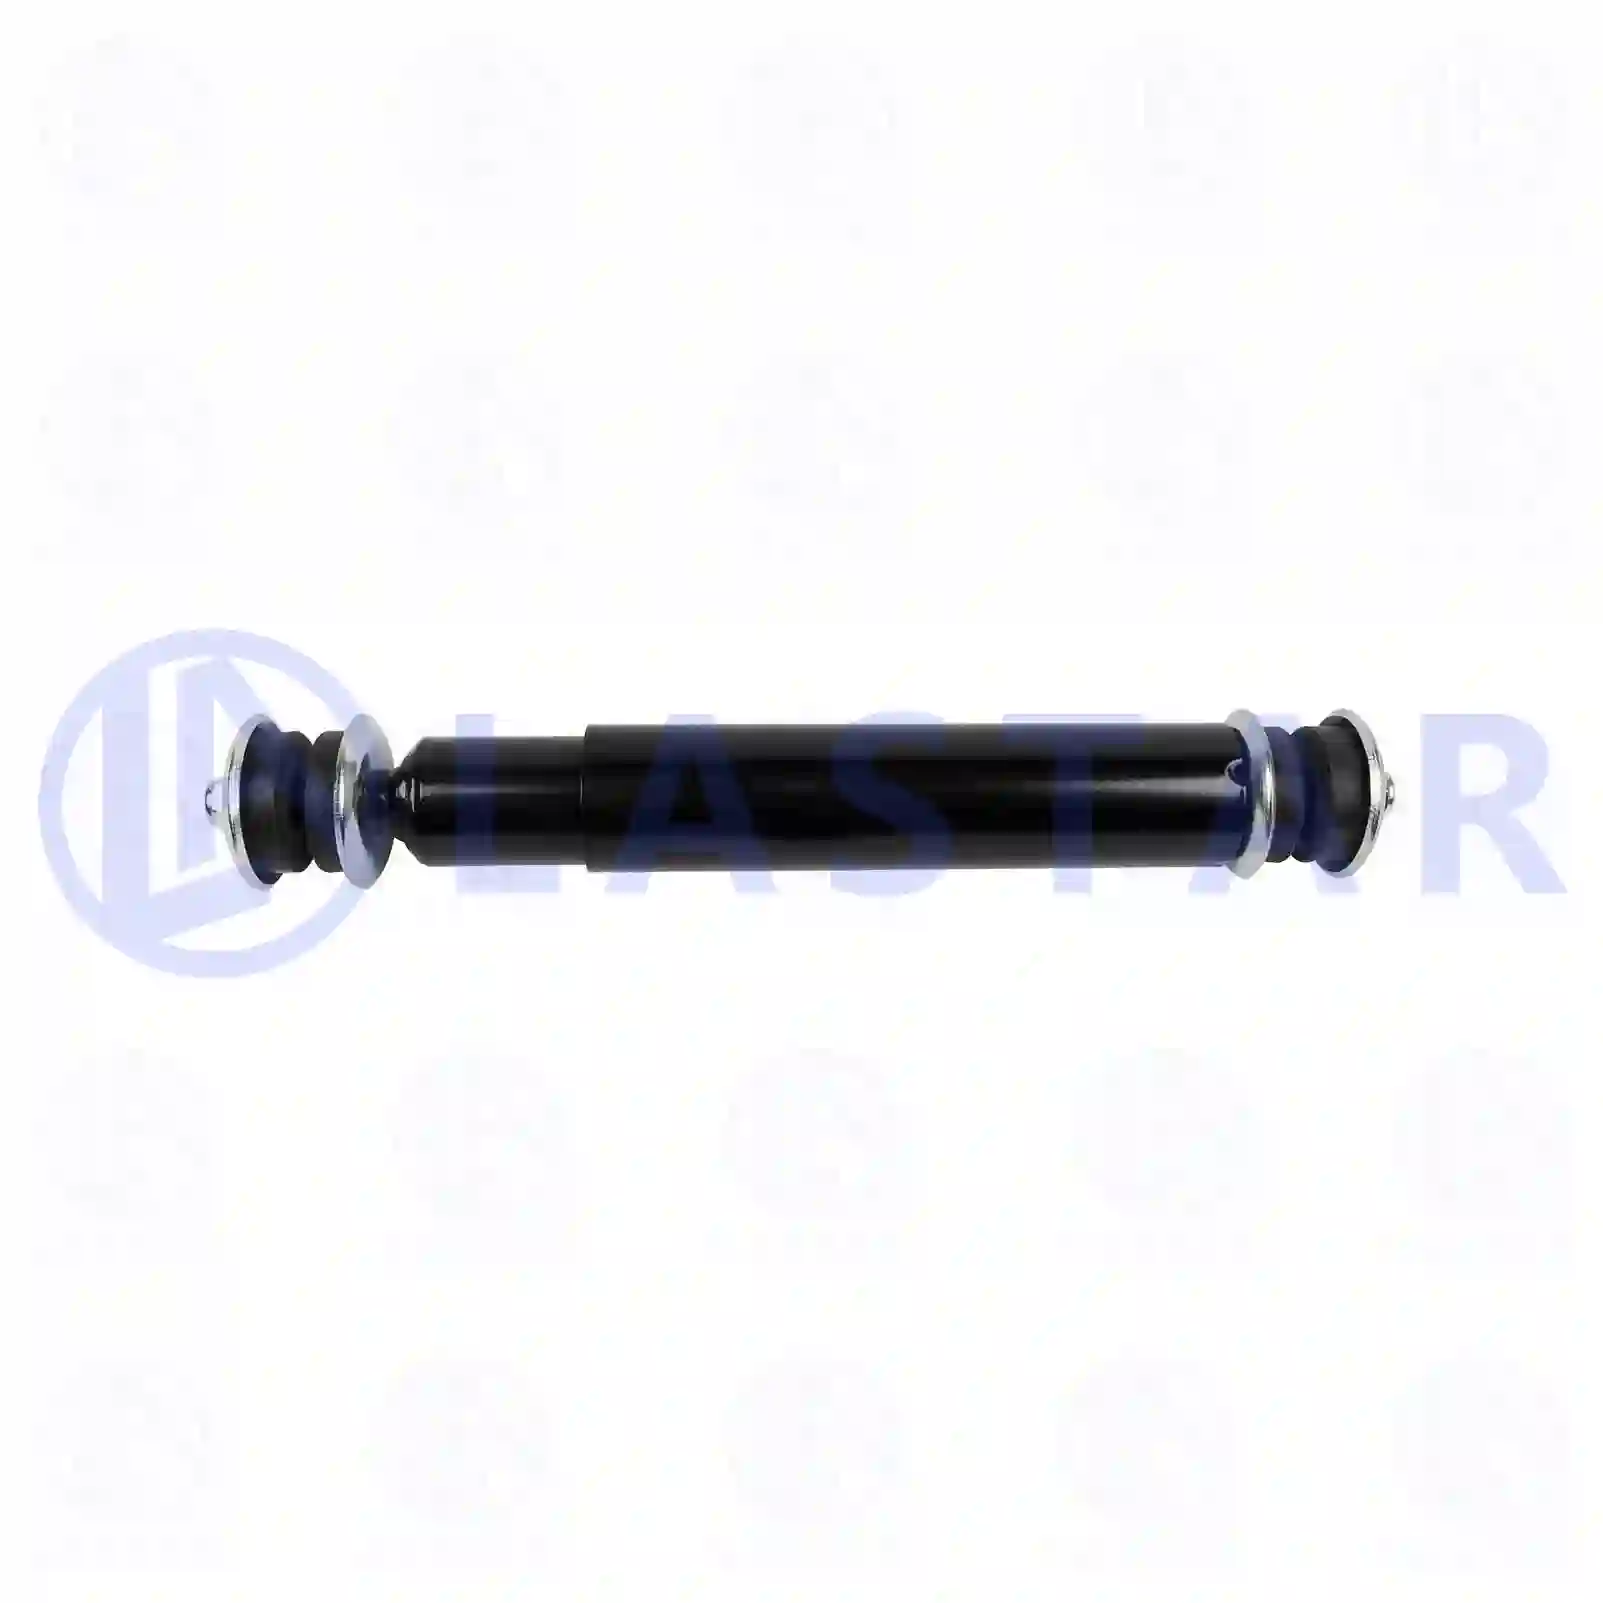 Shock absorber, 77727571, 1110589, 395064, 1110589, 395064, , ||  77727571 Lastar Spare Part | Truck Spare Parts, Auotomotive Spare Parts Shock absorber, 77727571, 1110589, 395064, 1110589, 395064, , ||  77727571 Lastar Spare Part | Truck Spare Parts, Auotomotive Spare Parts